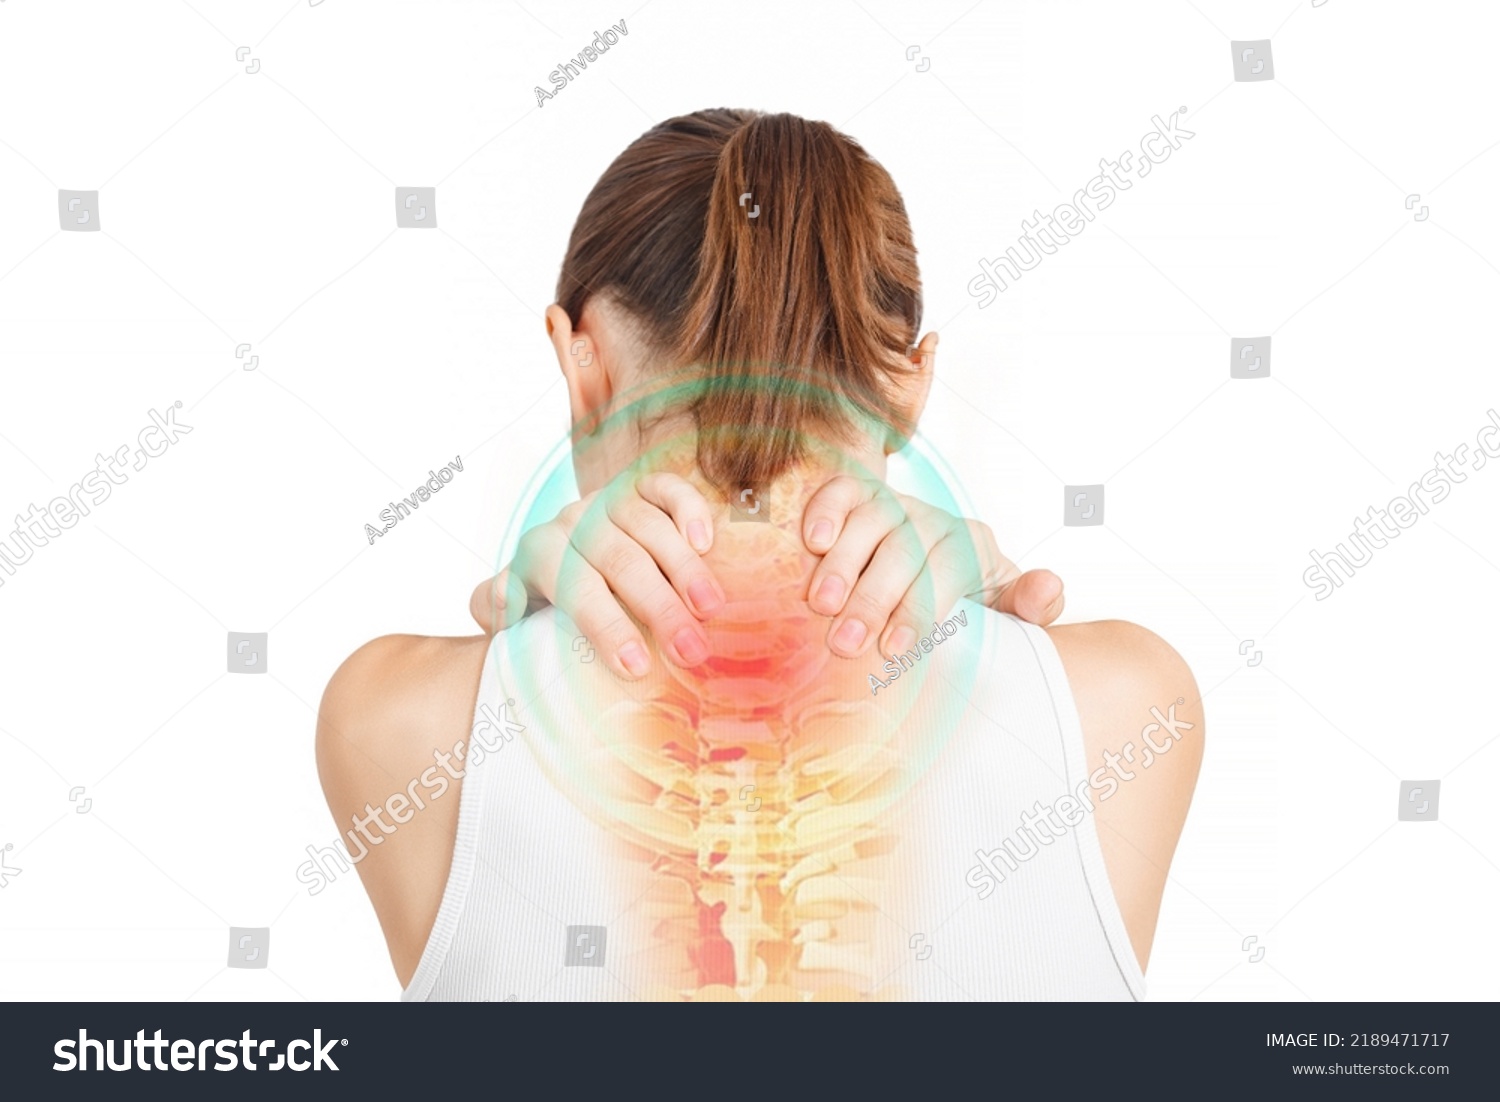 Spine of woman with neck pain. Young woman holding his neck in pain. Medical concept. Healthcare and medical concept: pain in a neck. #2189471717